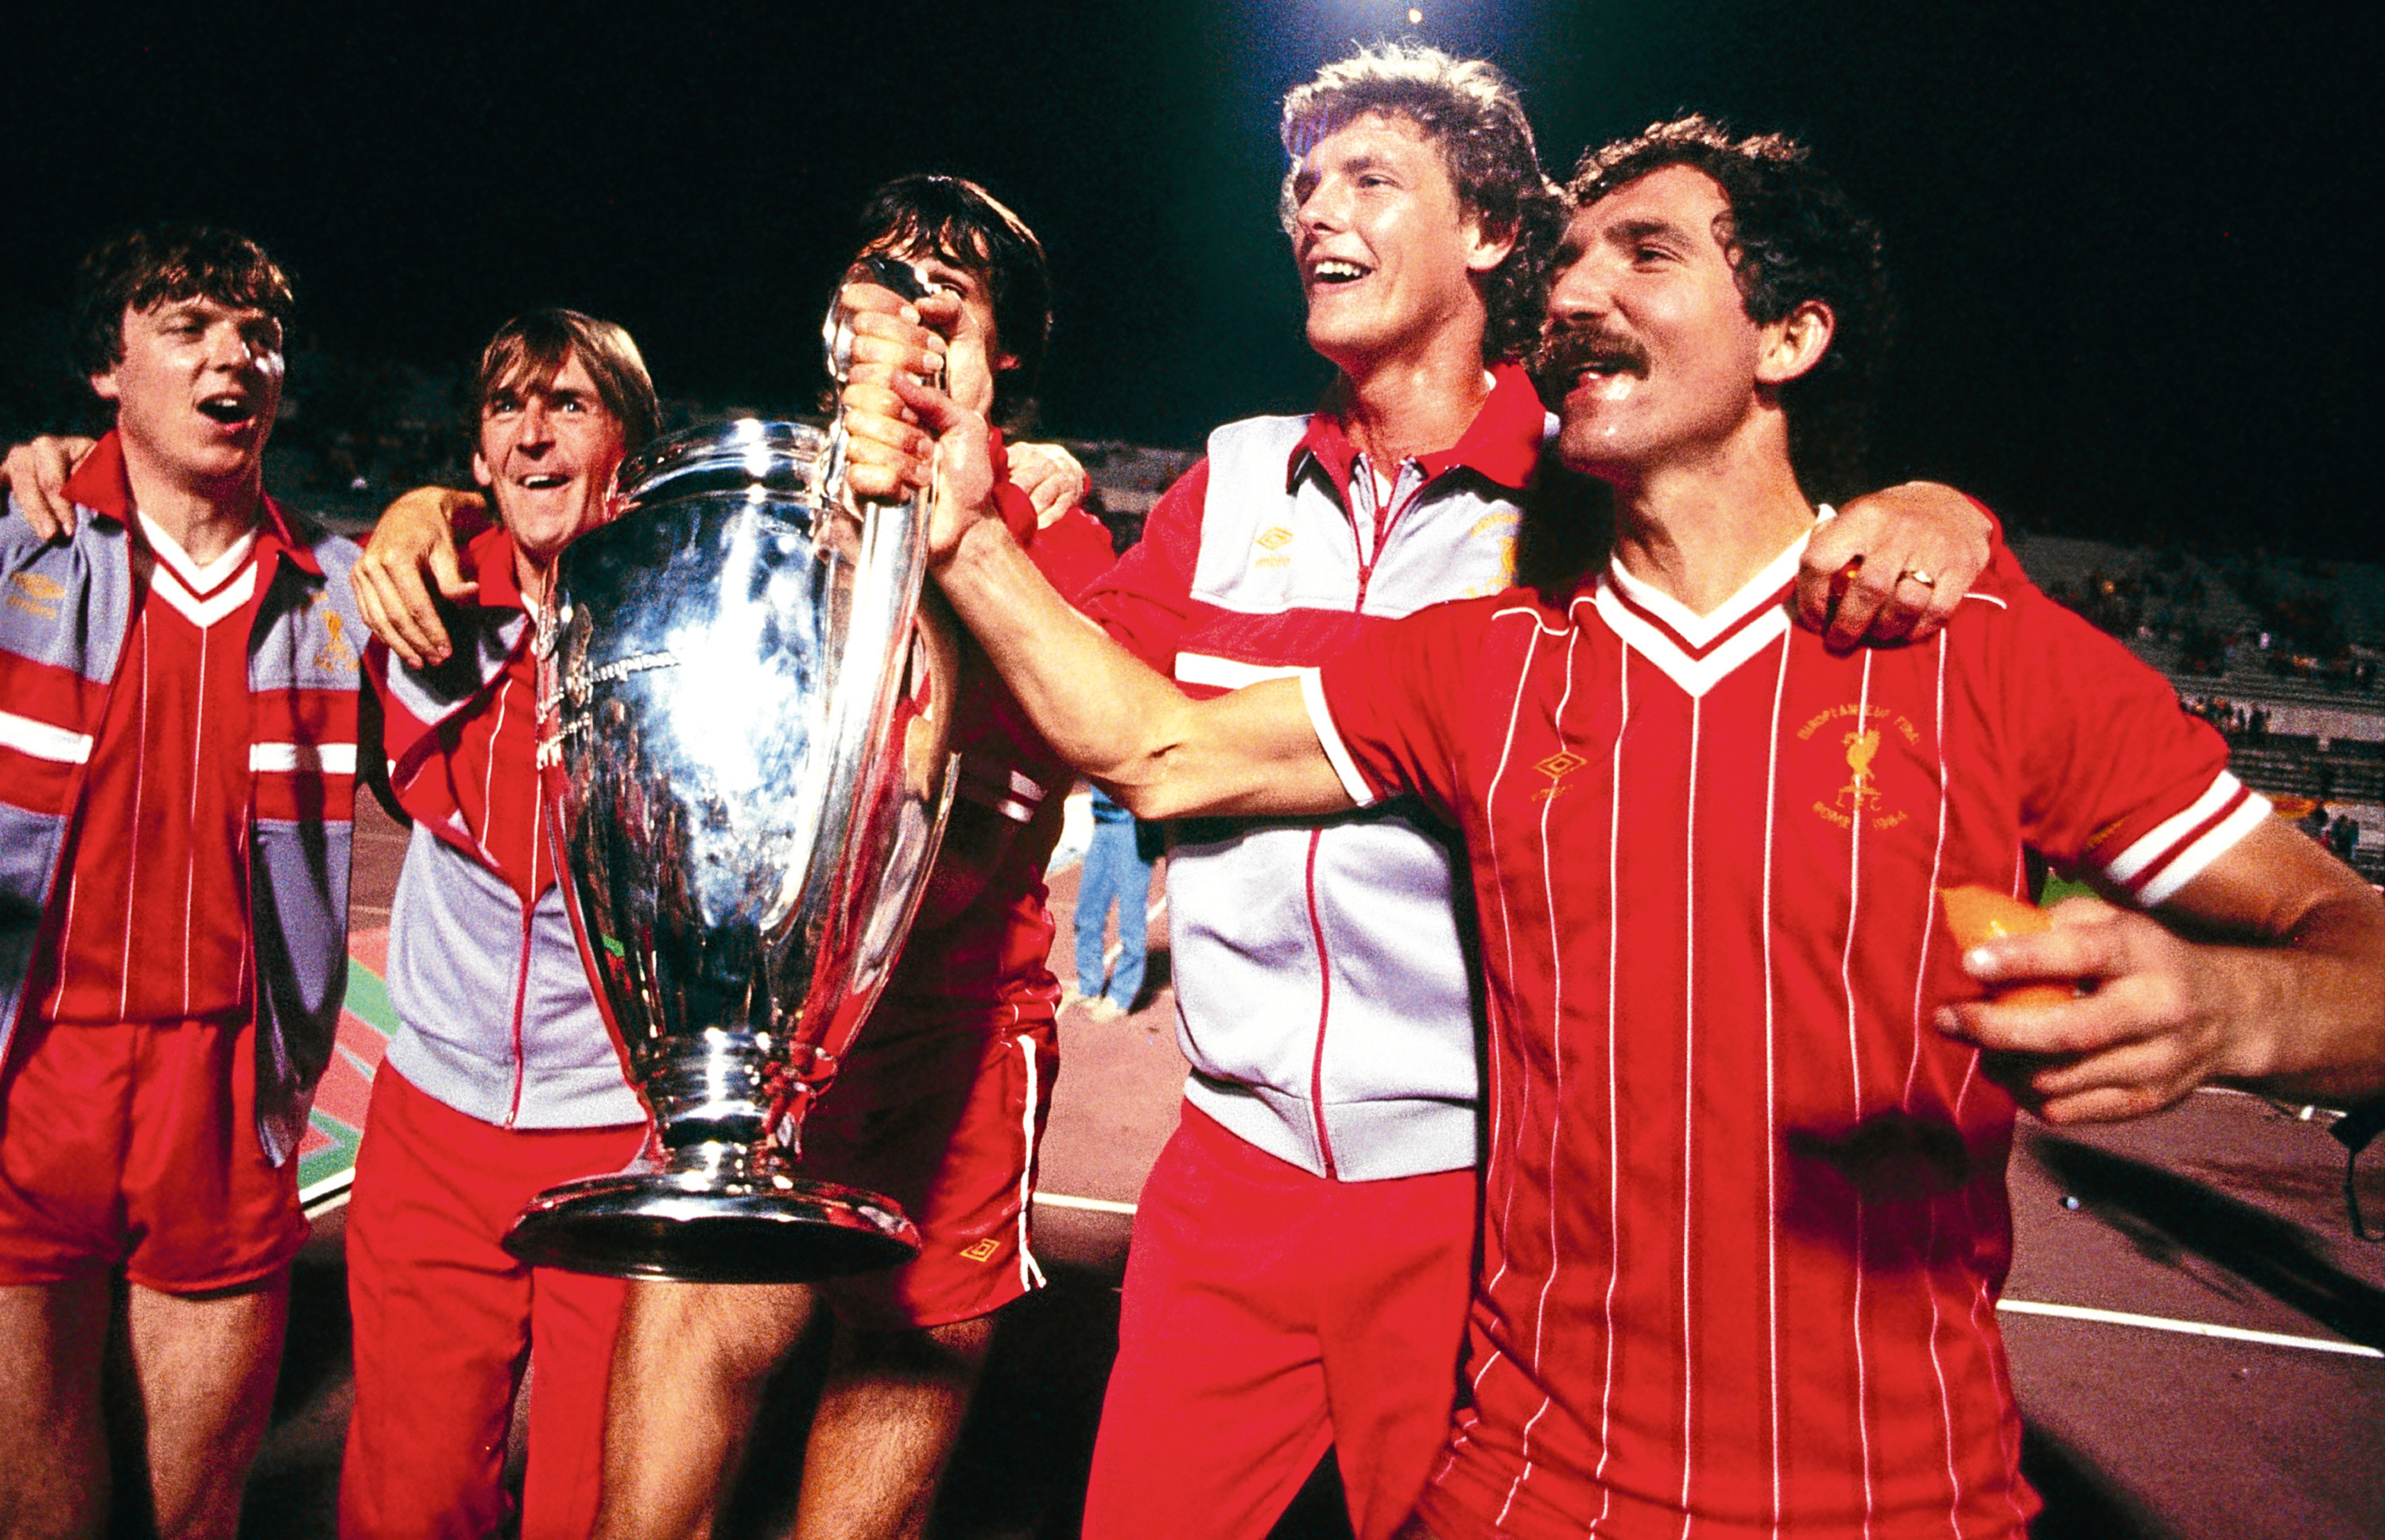 Liverpool’s Scots (from left) Steve Nicol, Kenny Dalglish, Alan Hansen, Gary Gillespie and Graeme Souness celebrate the European Cup Final win over Roma in their own backyard back in 1984 (Liverpool FC via Getty Images)